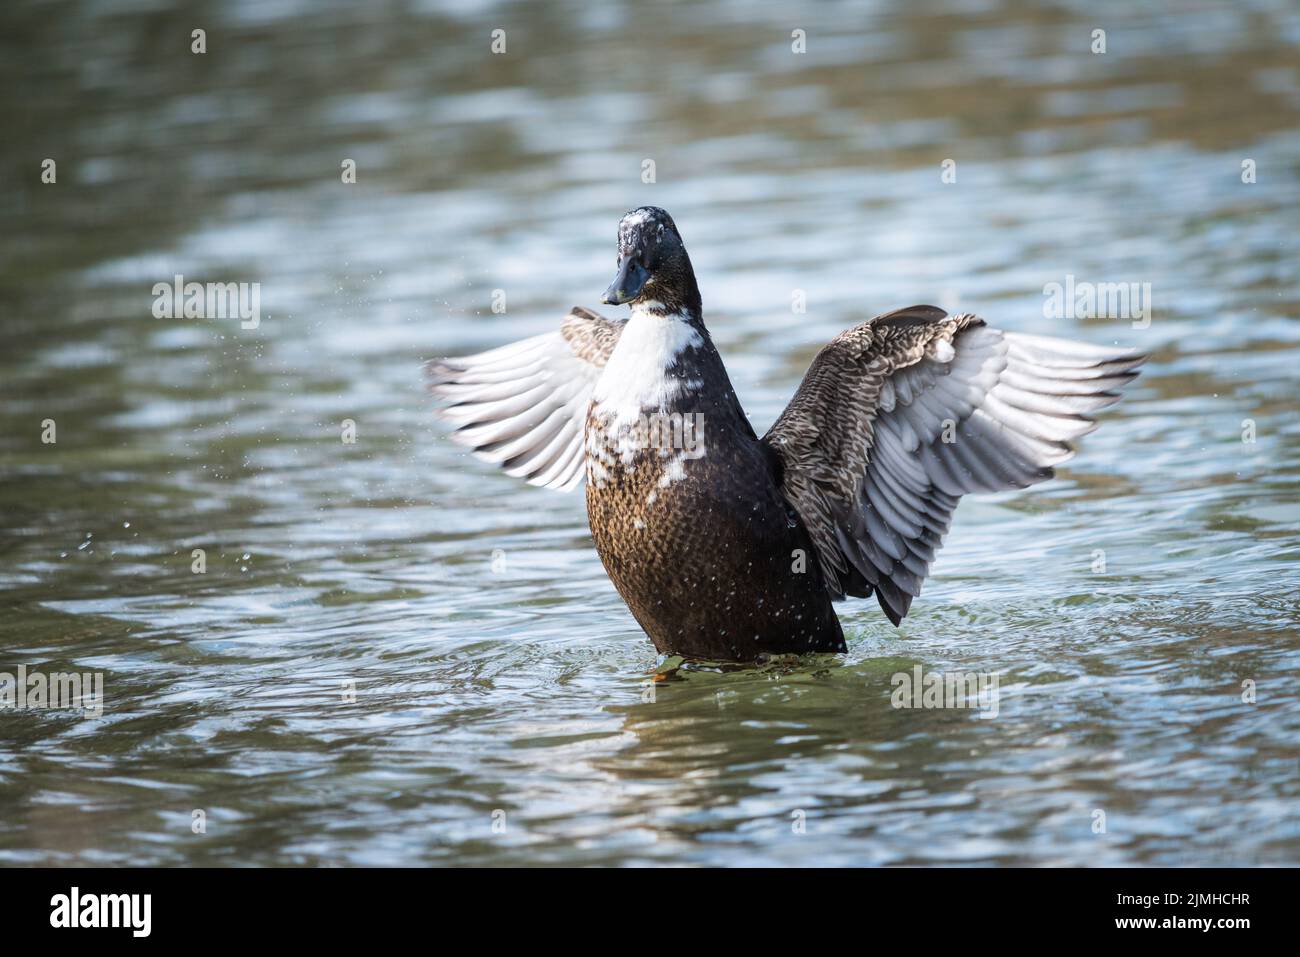 Wild gray duck close-up swimming in the water. A male migratory gray-brown duck spreads its wings Stock Photo